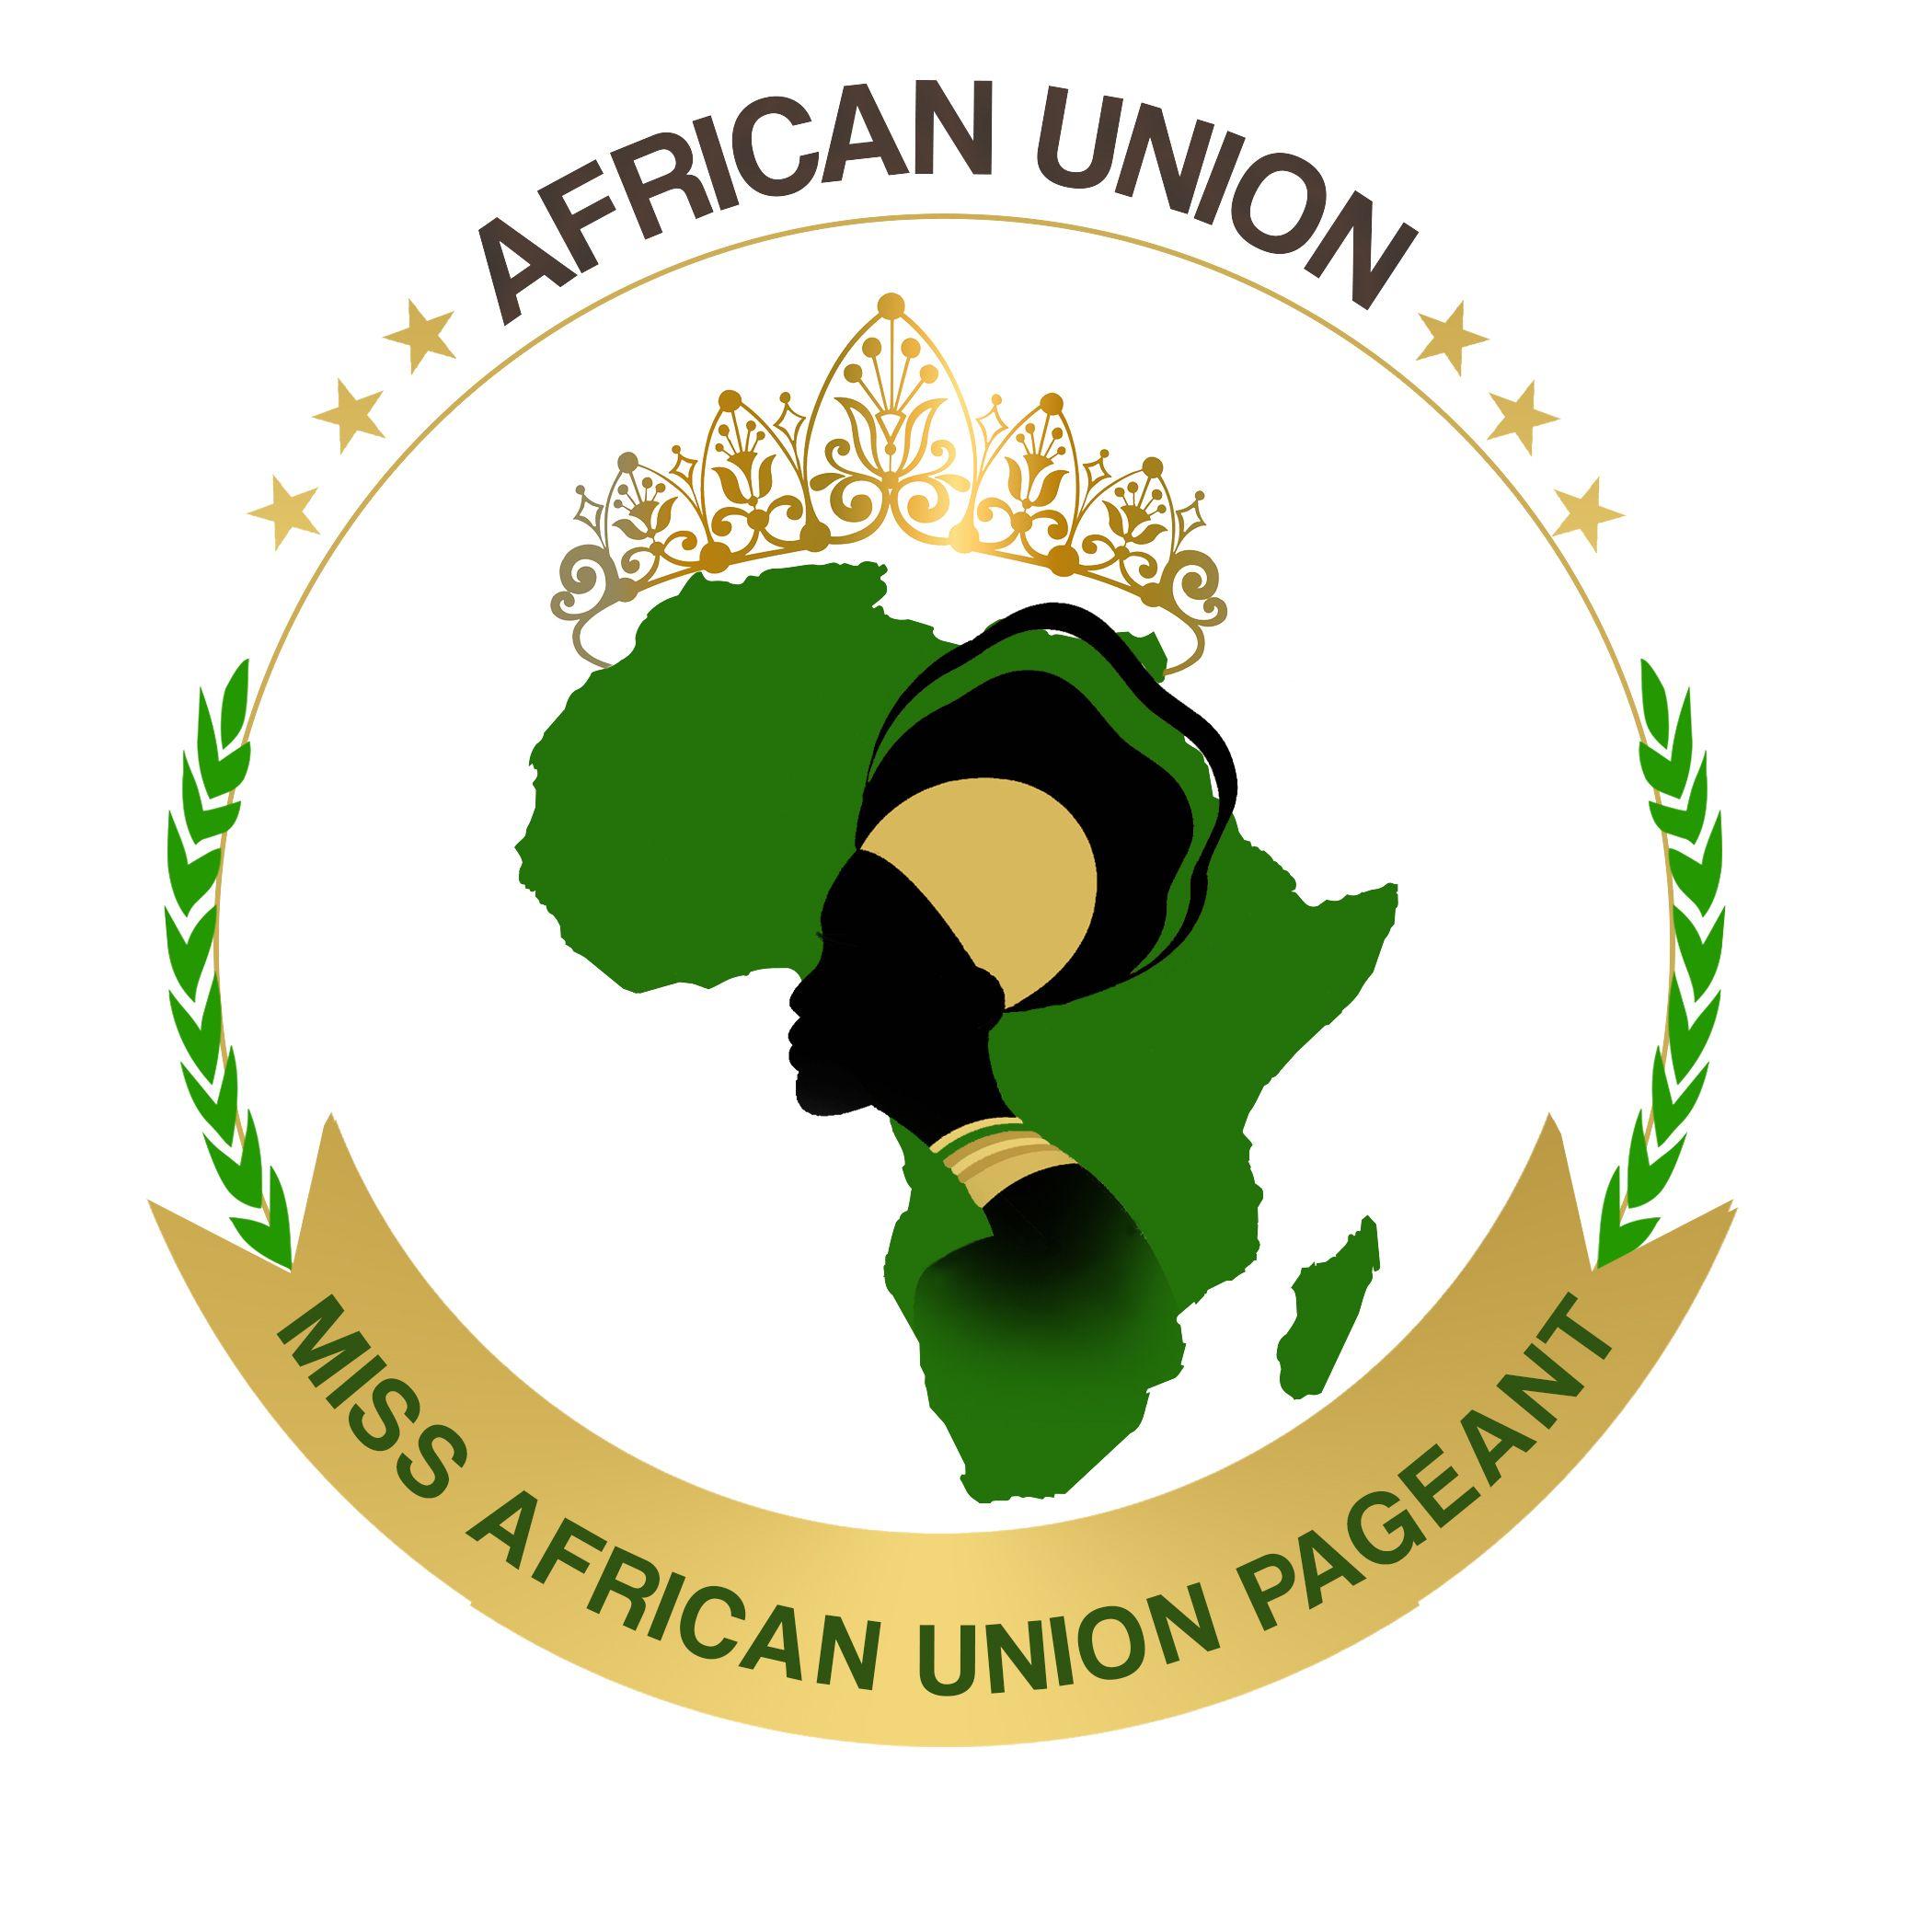 African Union Logo - The African Union – Miss African Union Pageant